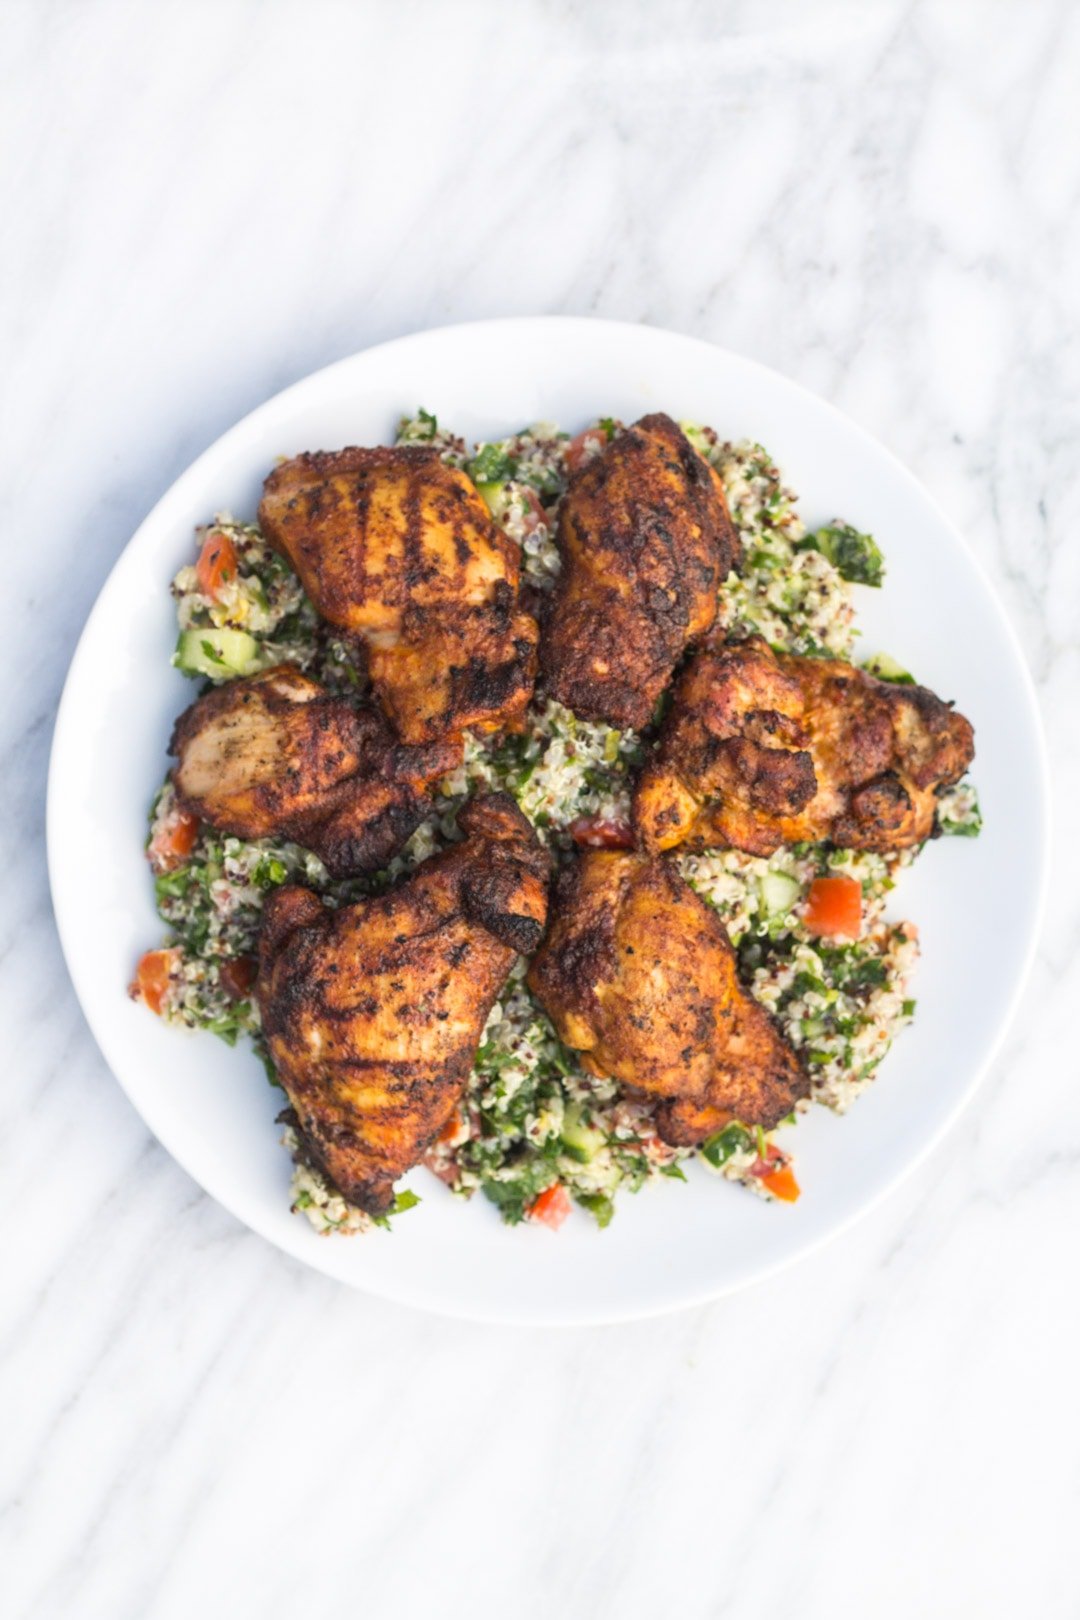 Looking down at a plate filled with quinoa tabbouleh and topped with grilled marinated chicken 